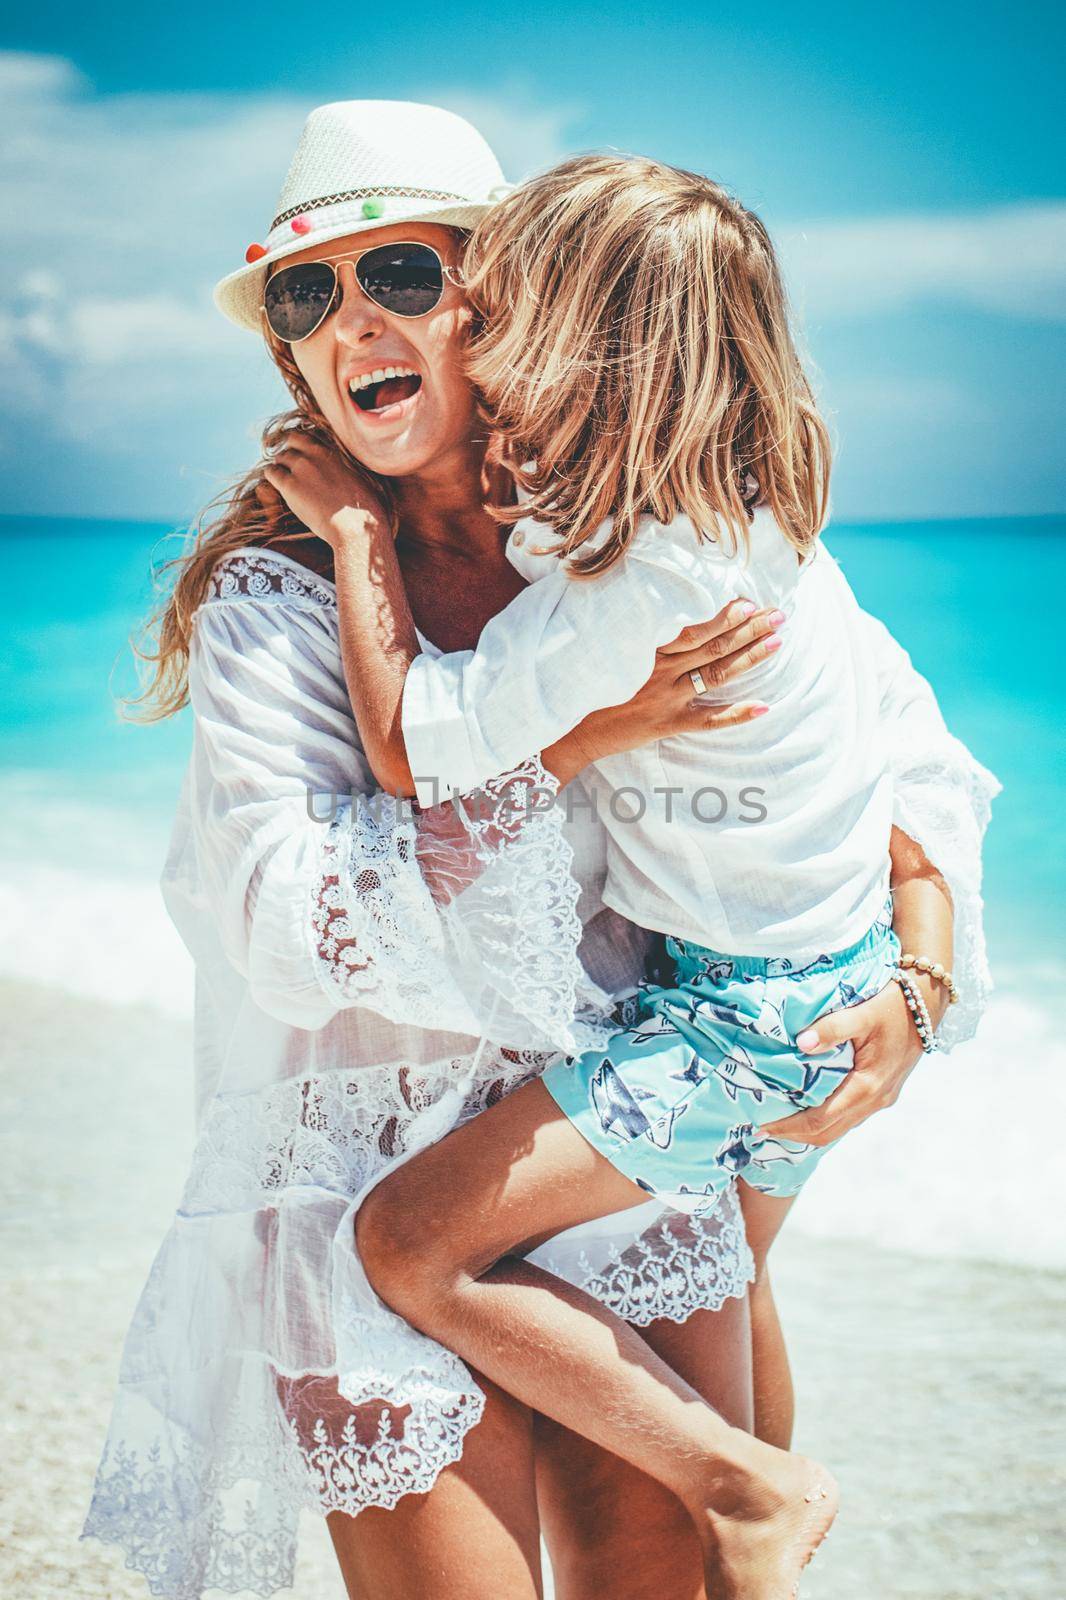 Beautiful little boy enjoying with his mother on the beach. She is embracing him and he is kissing mother's cheek.